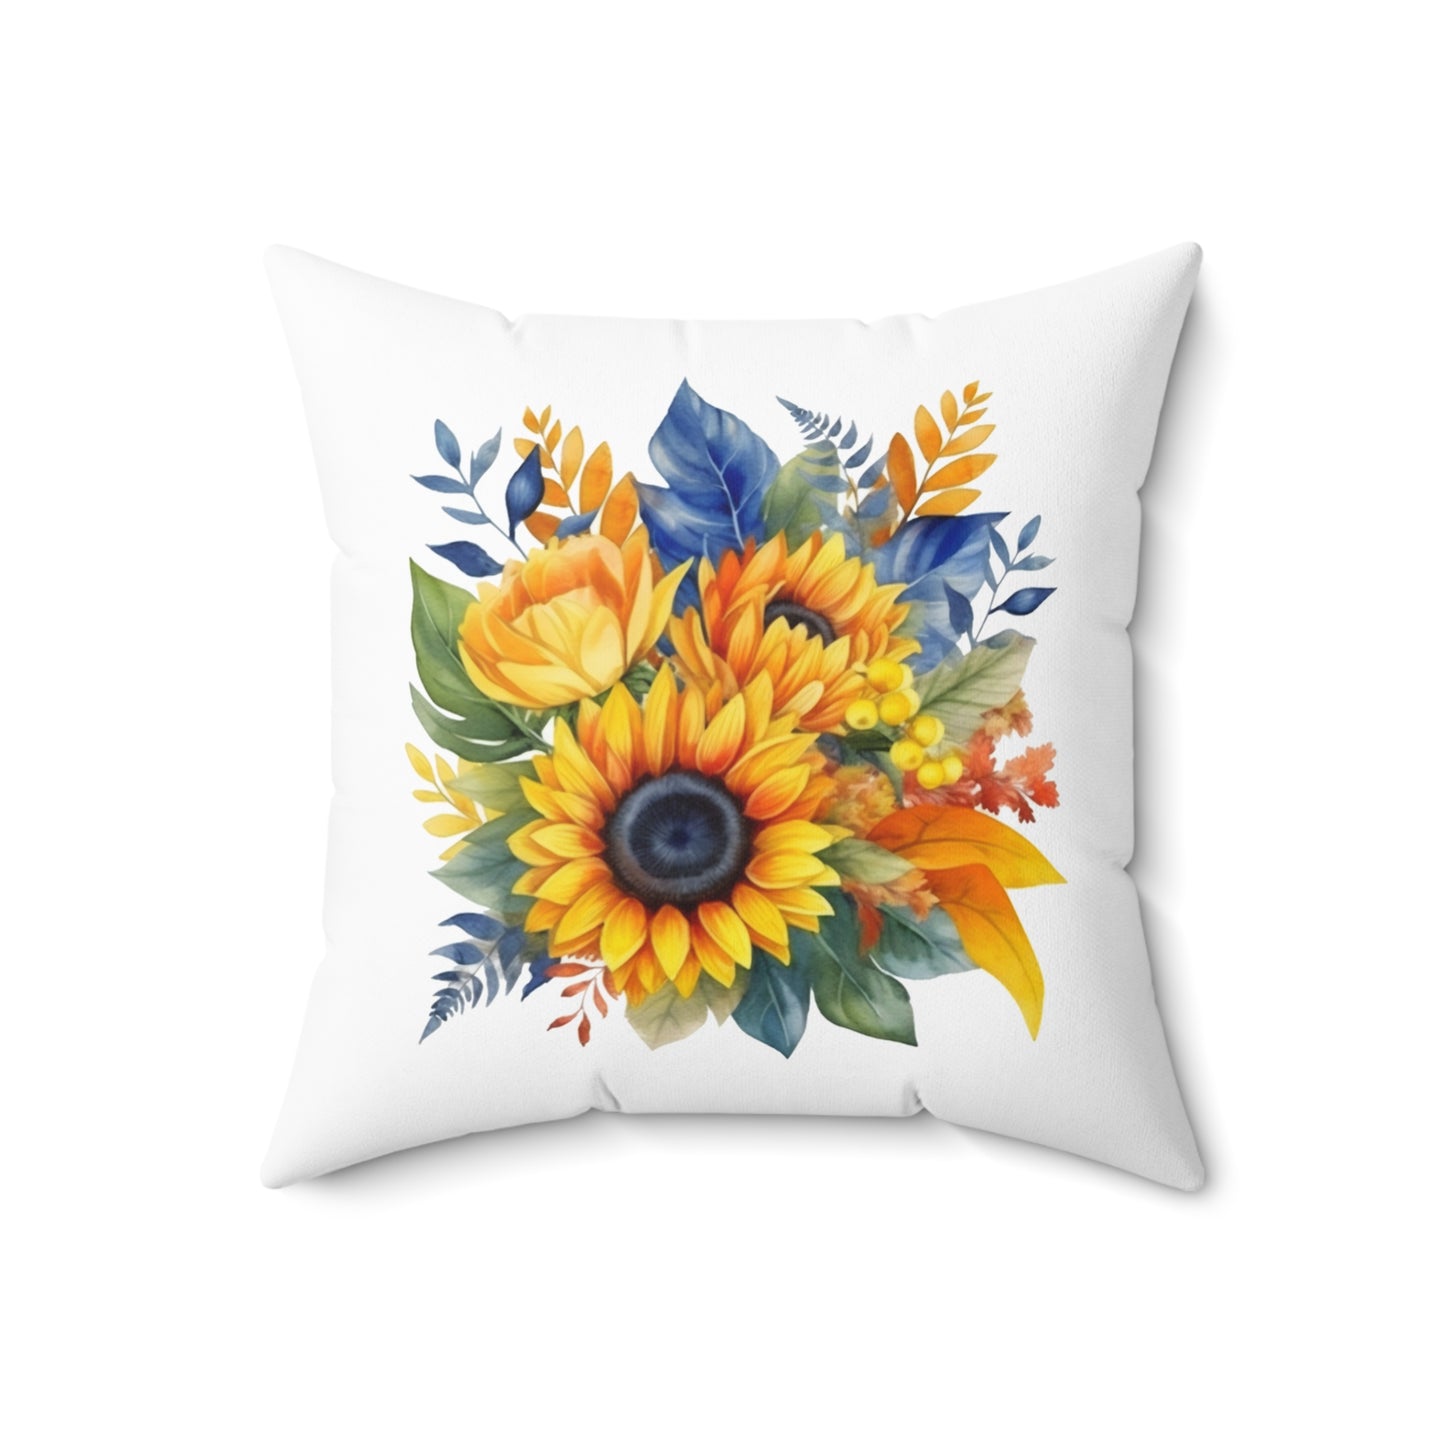 Sunflowers Throw Pillow, Watercolor Sunflowers Decorative Pillow, Square Flower Cushion, Double Sided Accent Pillow, Concealed Zipper